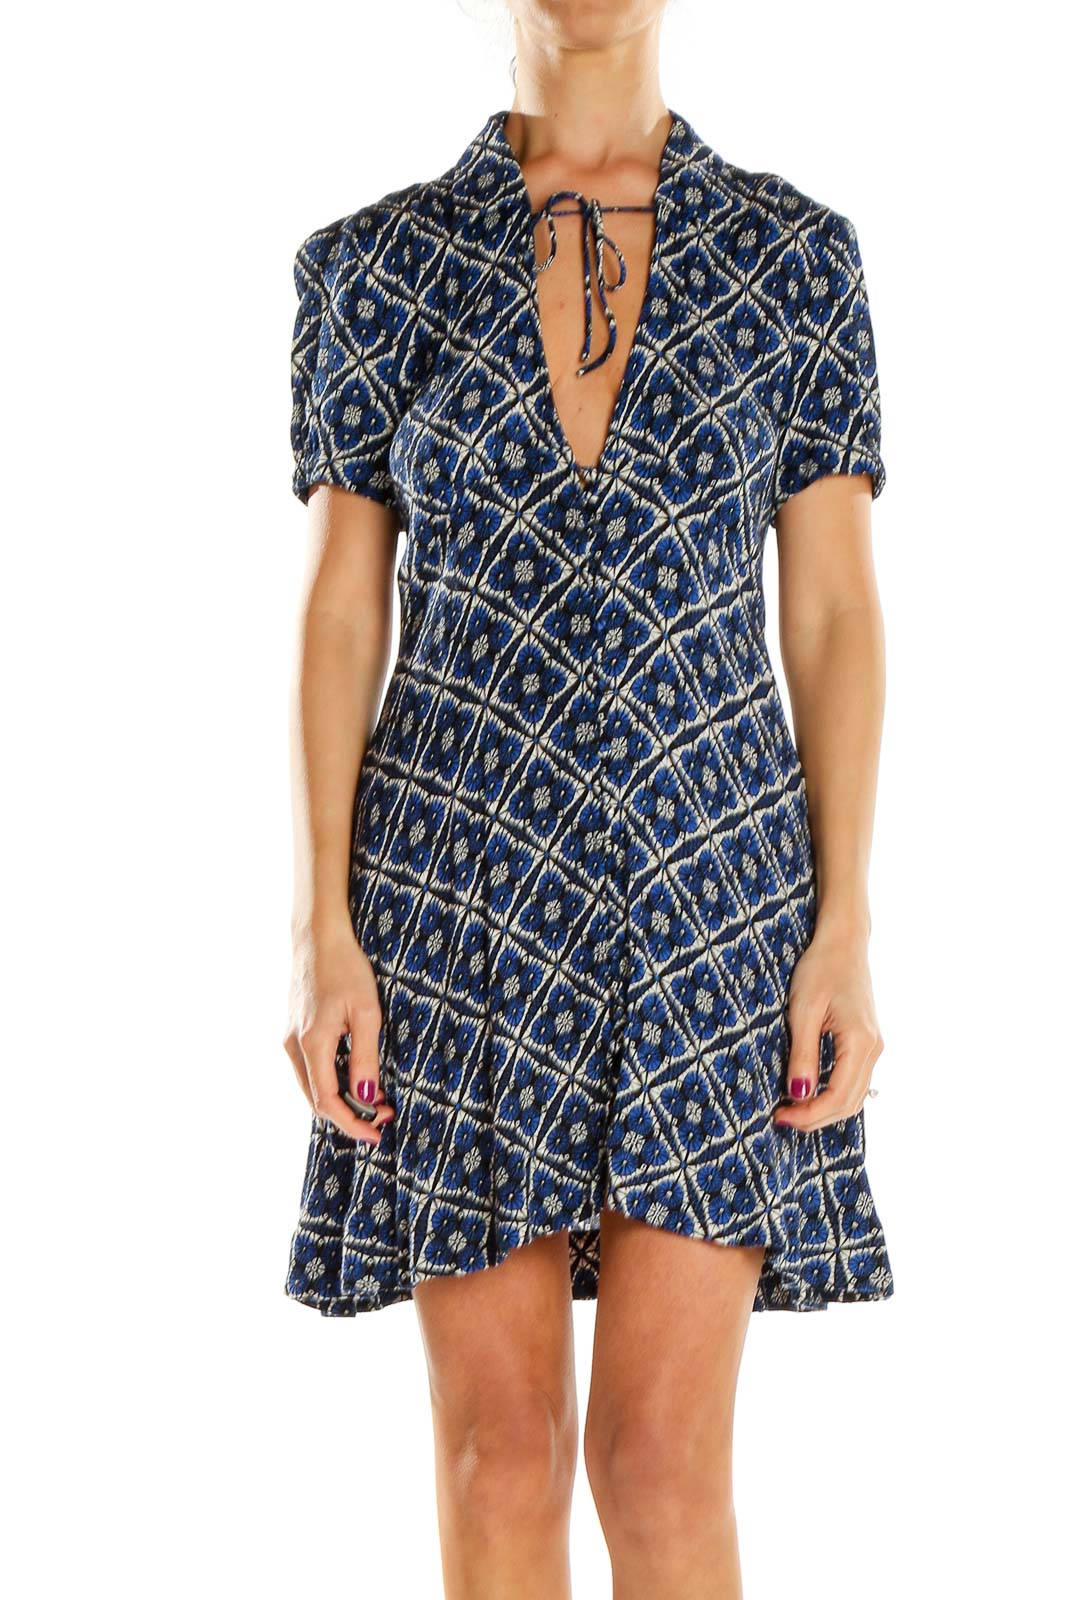 Blue Printed Fit & Flare Sun Dress Front